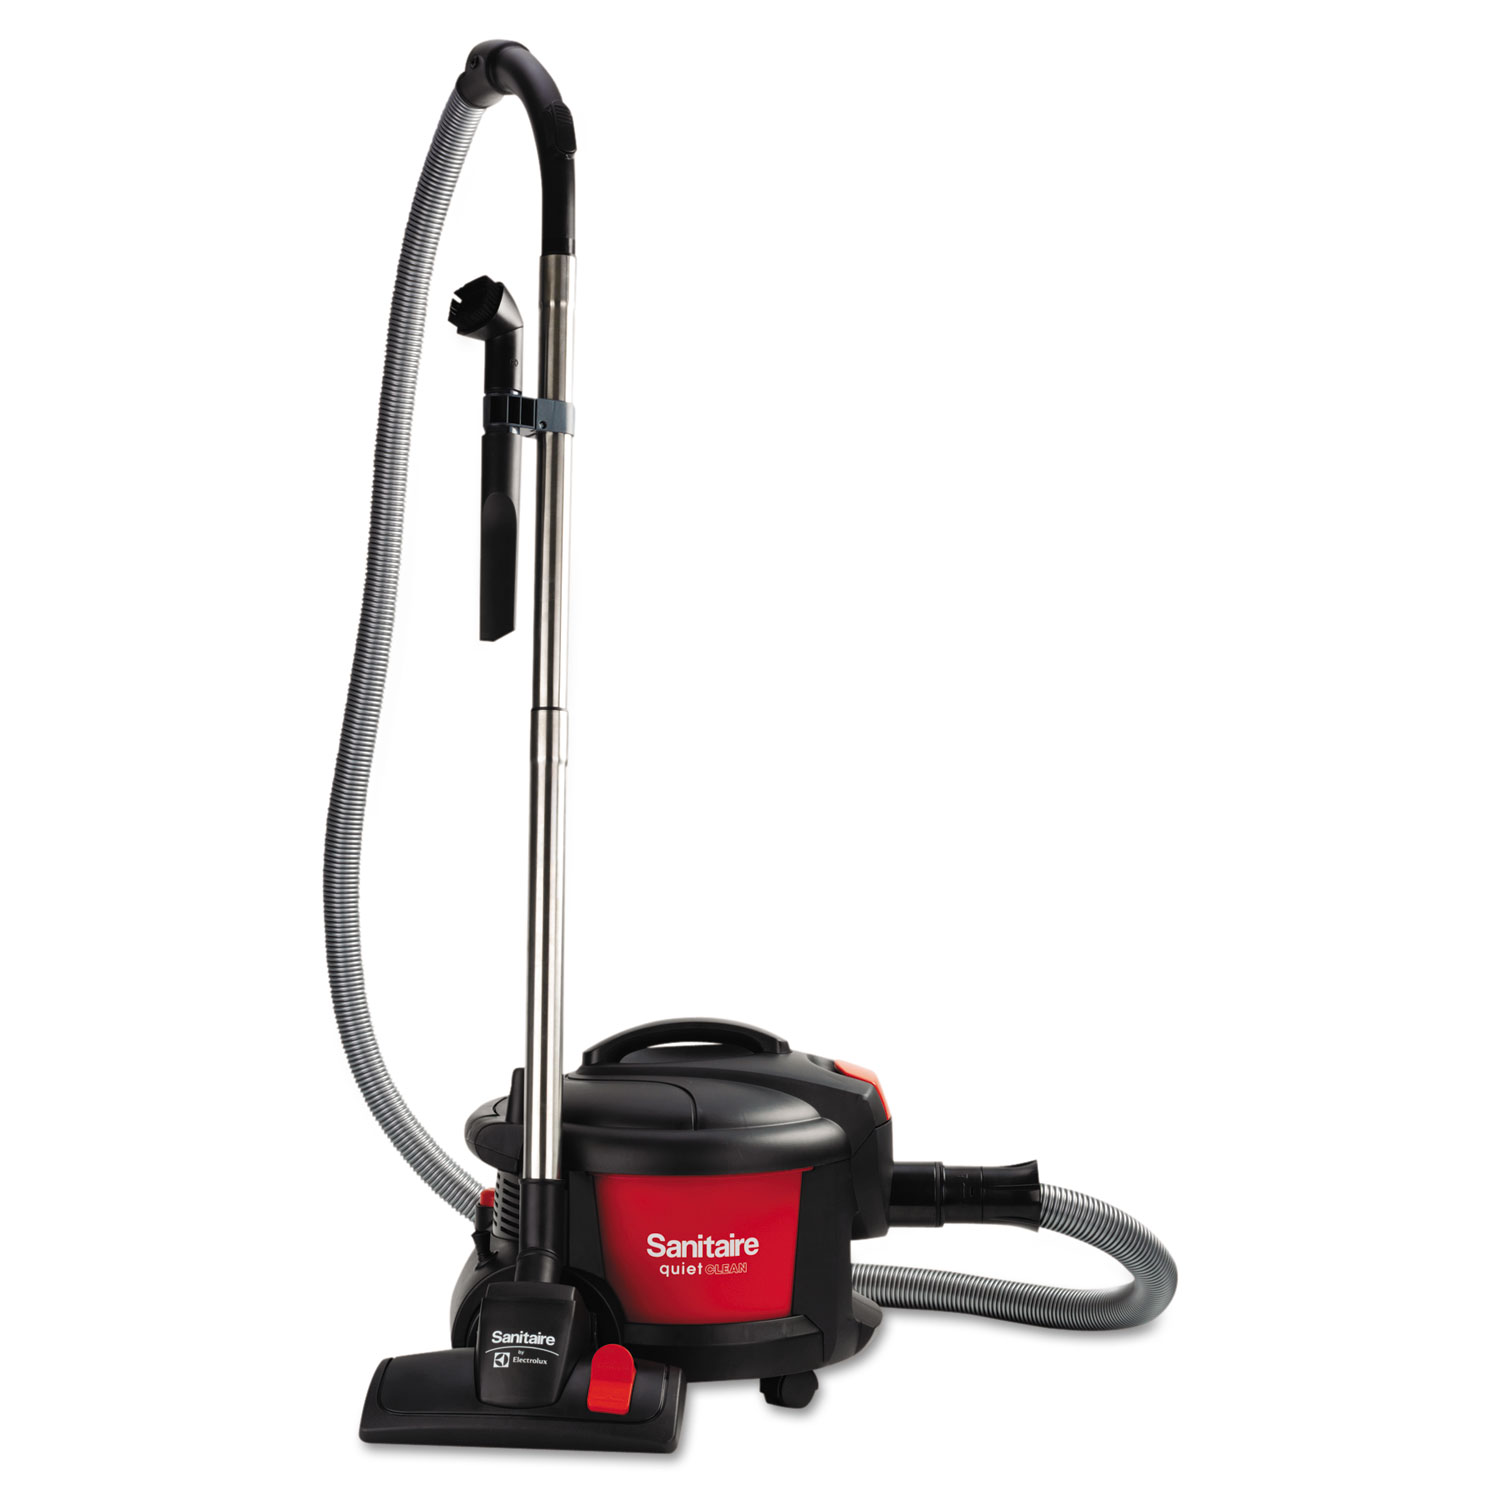  Sanitaire SC3700A EXTEND Top-Hat Canister Vacuum, 9 Amp, 11 Cleaning Path, Red/Black (EURSC3700A) 